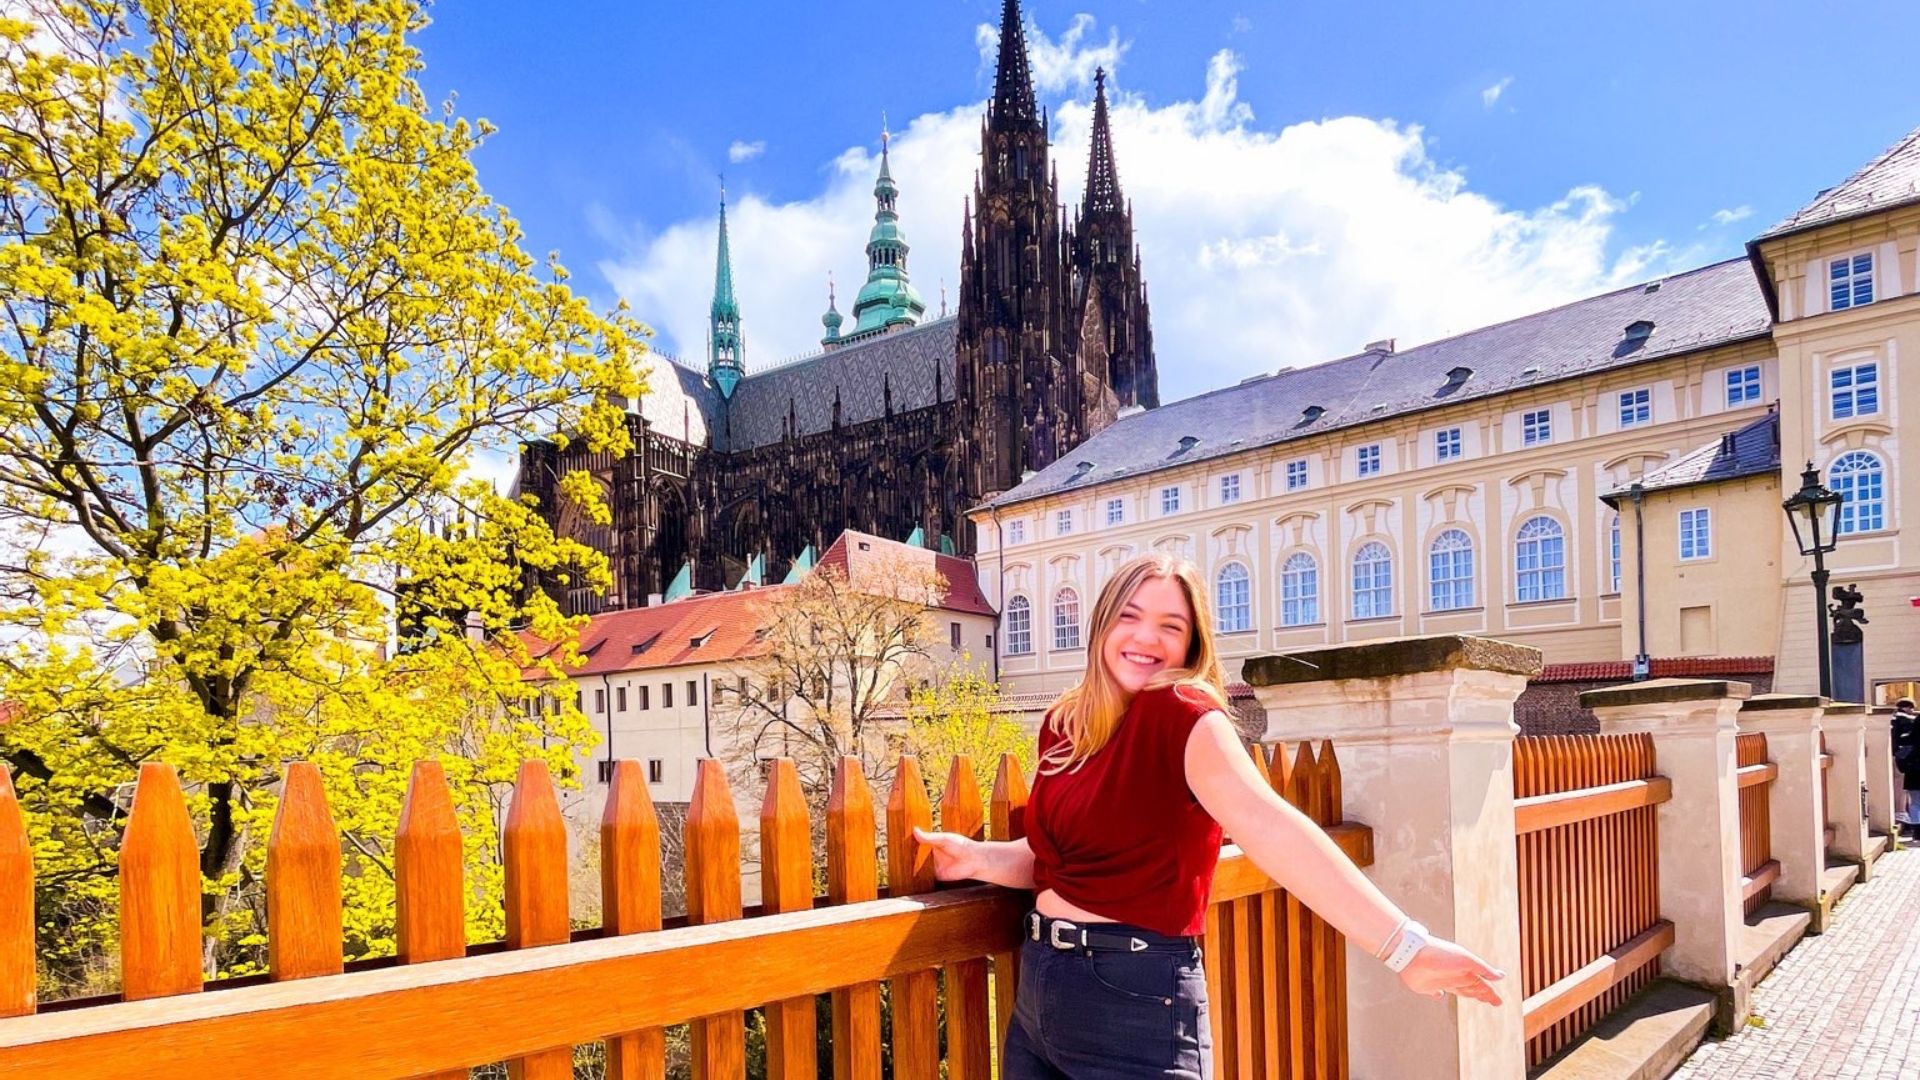 Katie Gray taking a photo with St. Vitus Cathedral in the background